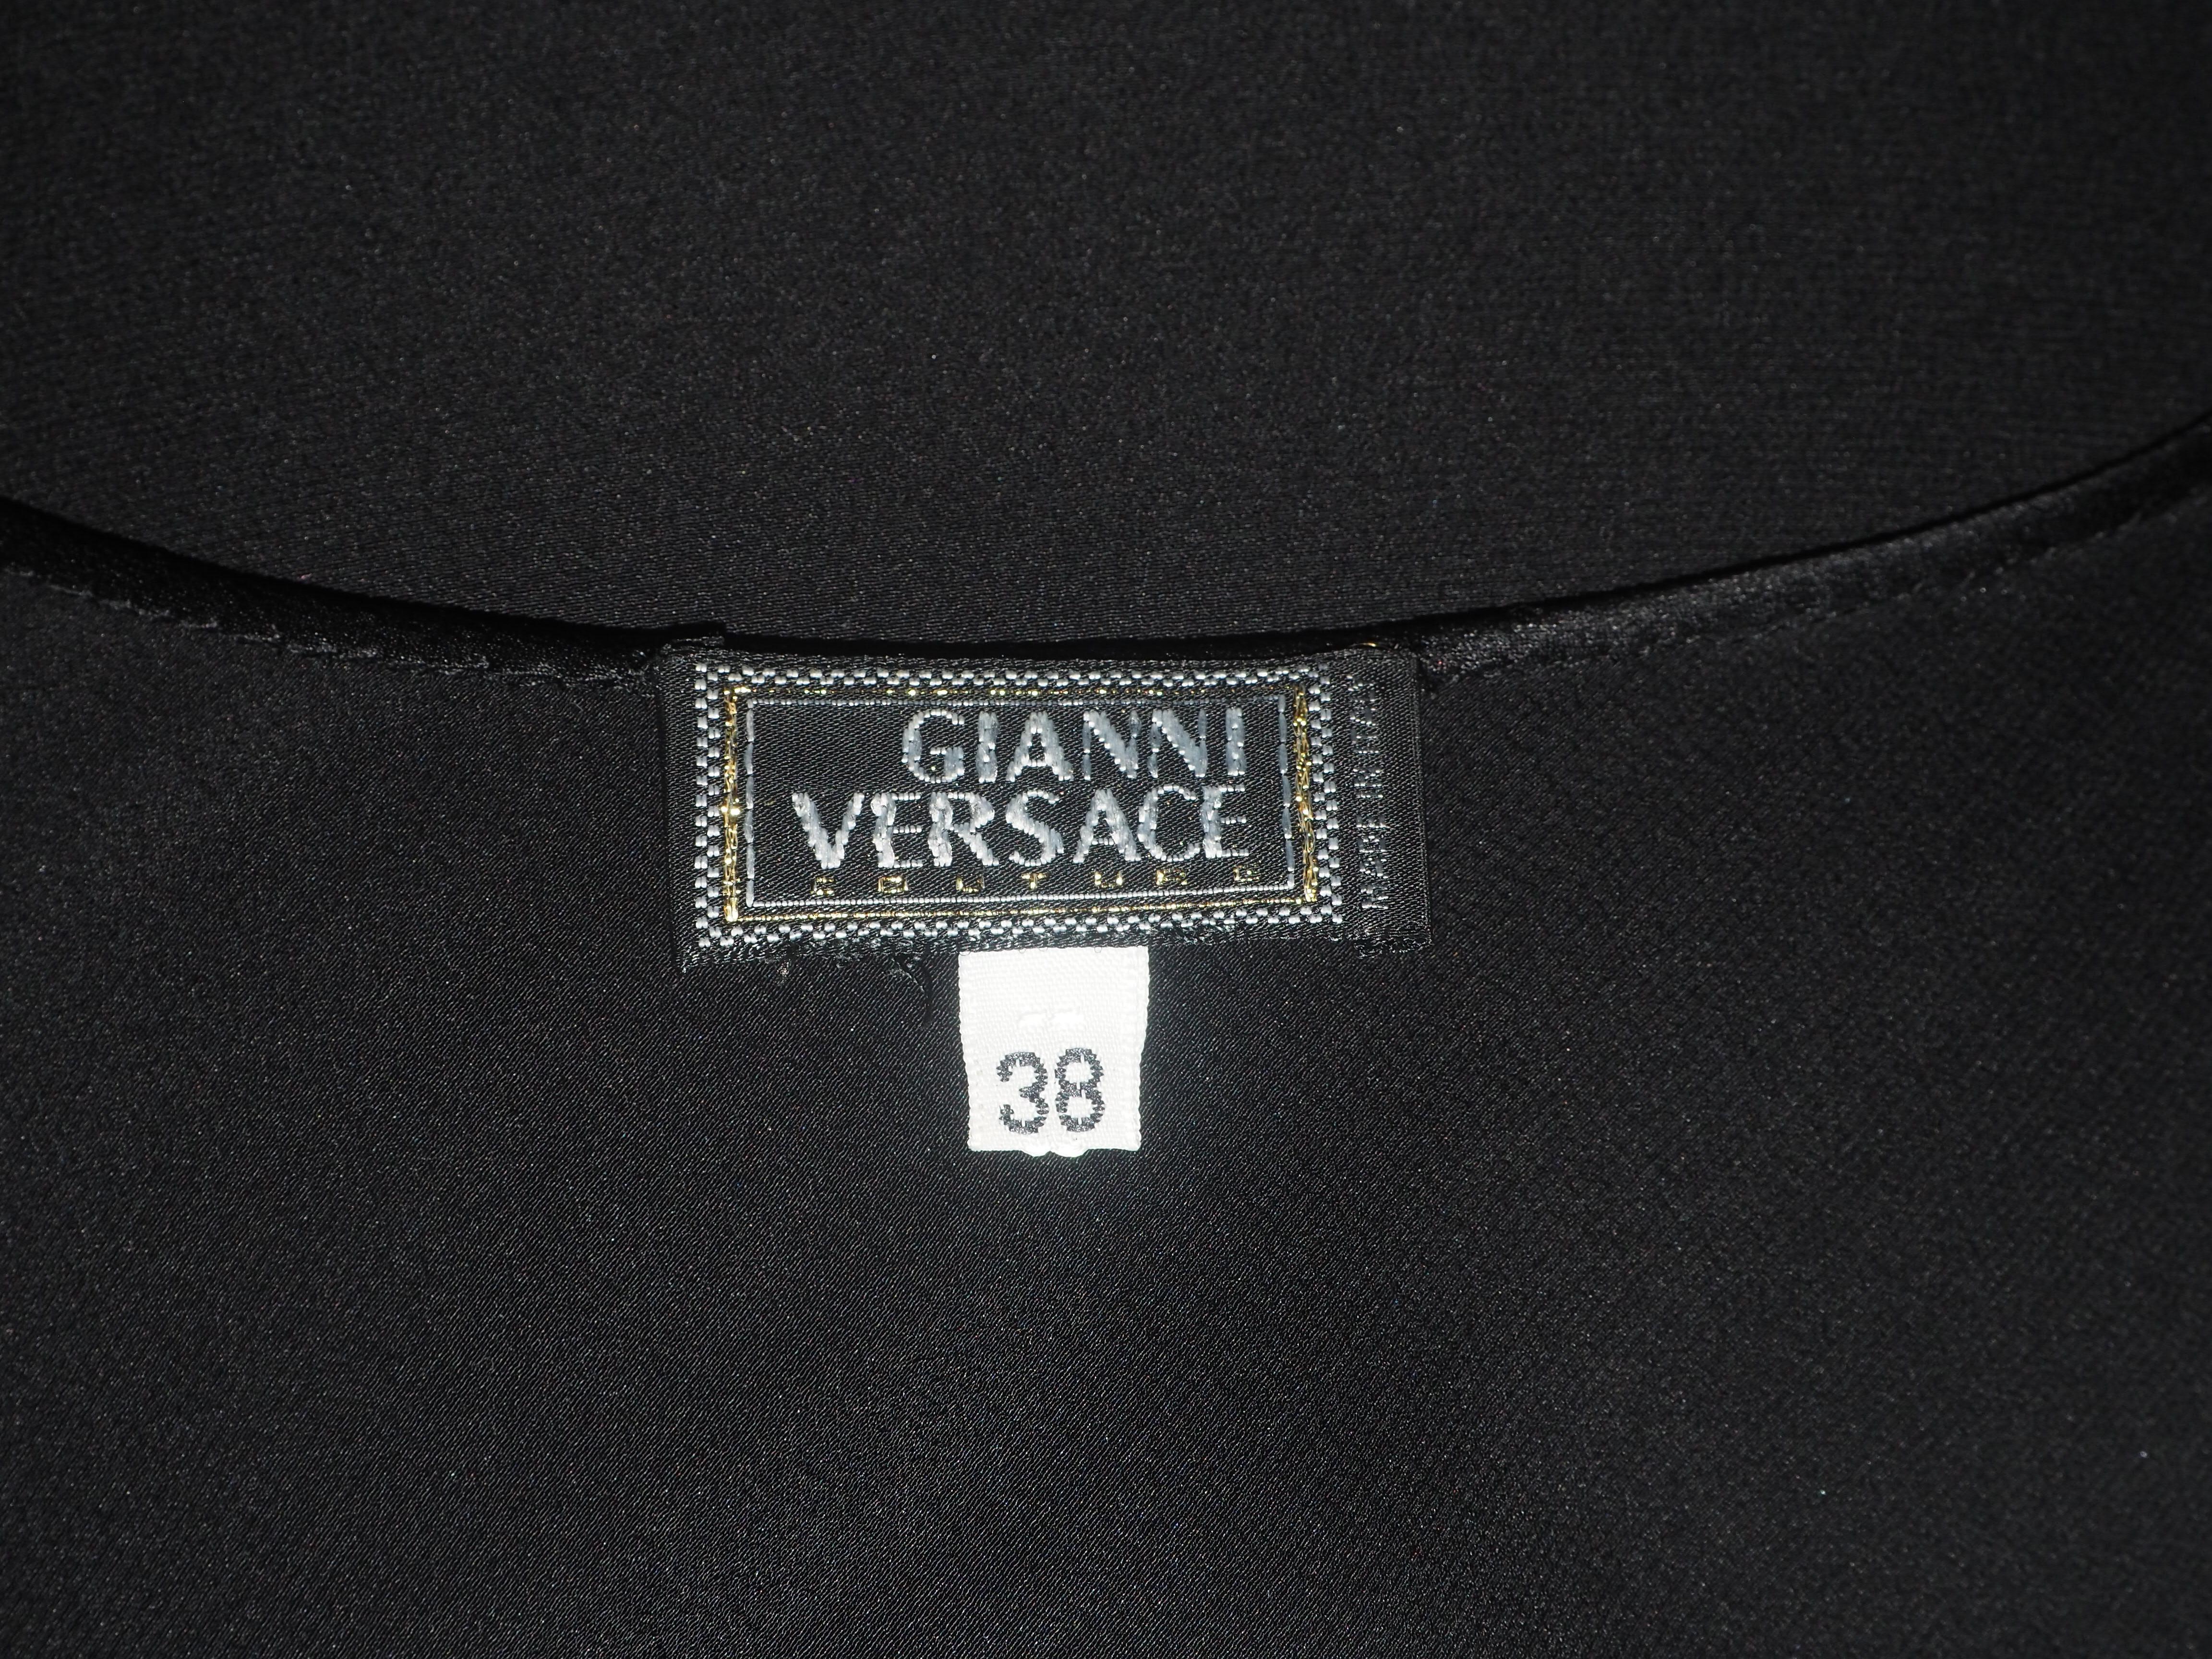 Gianni Versace ICONIC FW 1996 Rhinestone Strap Gown For Sale 2